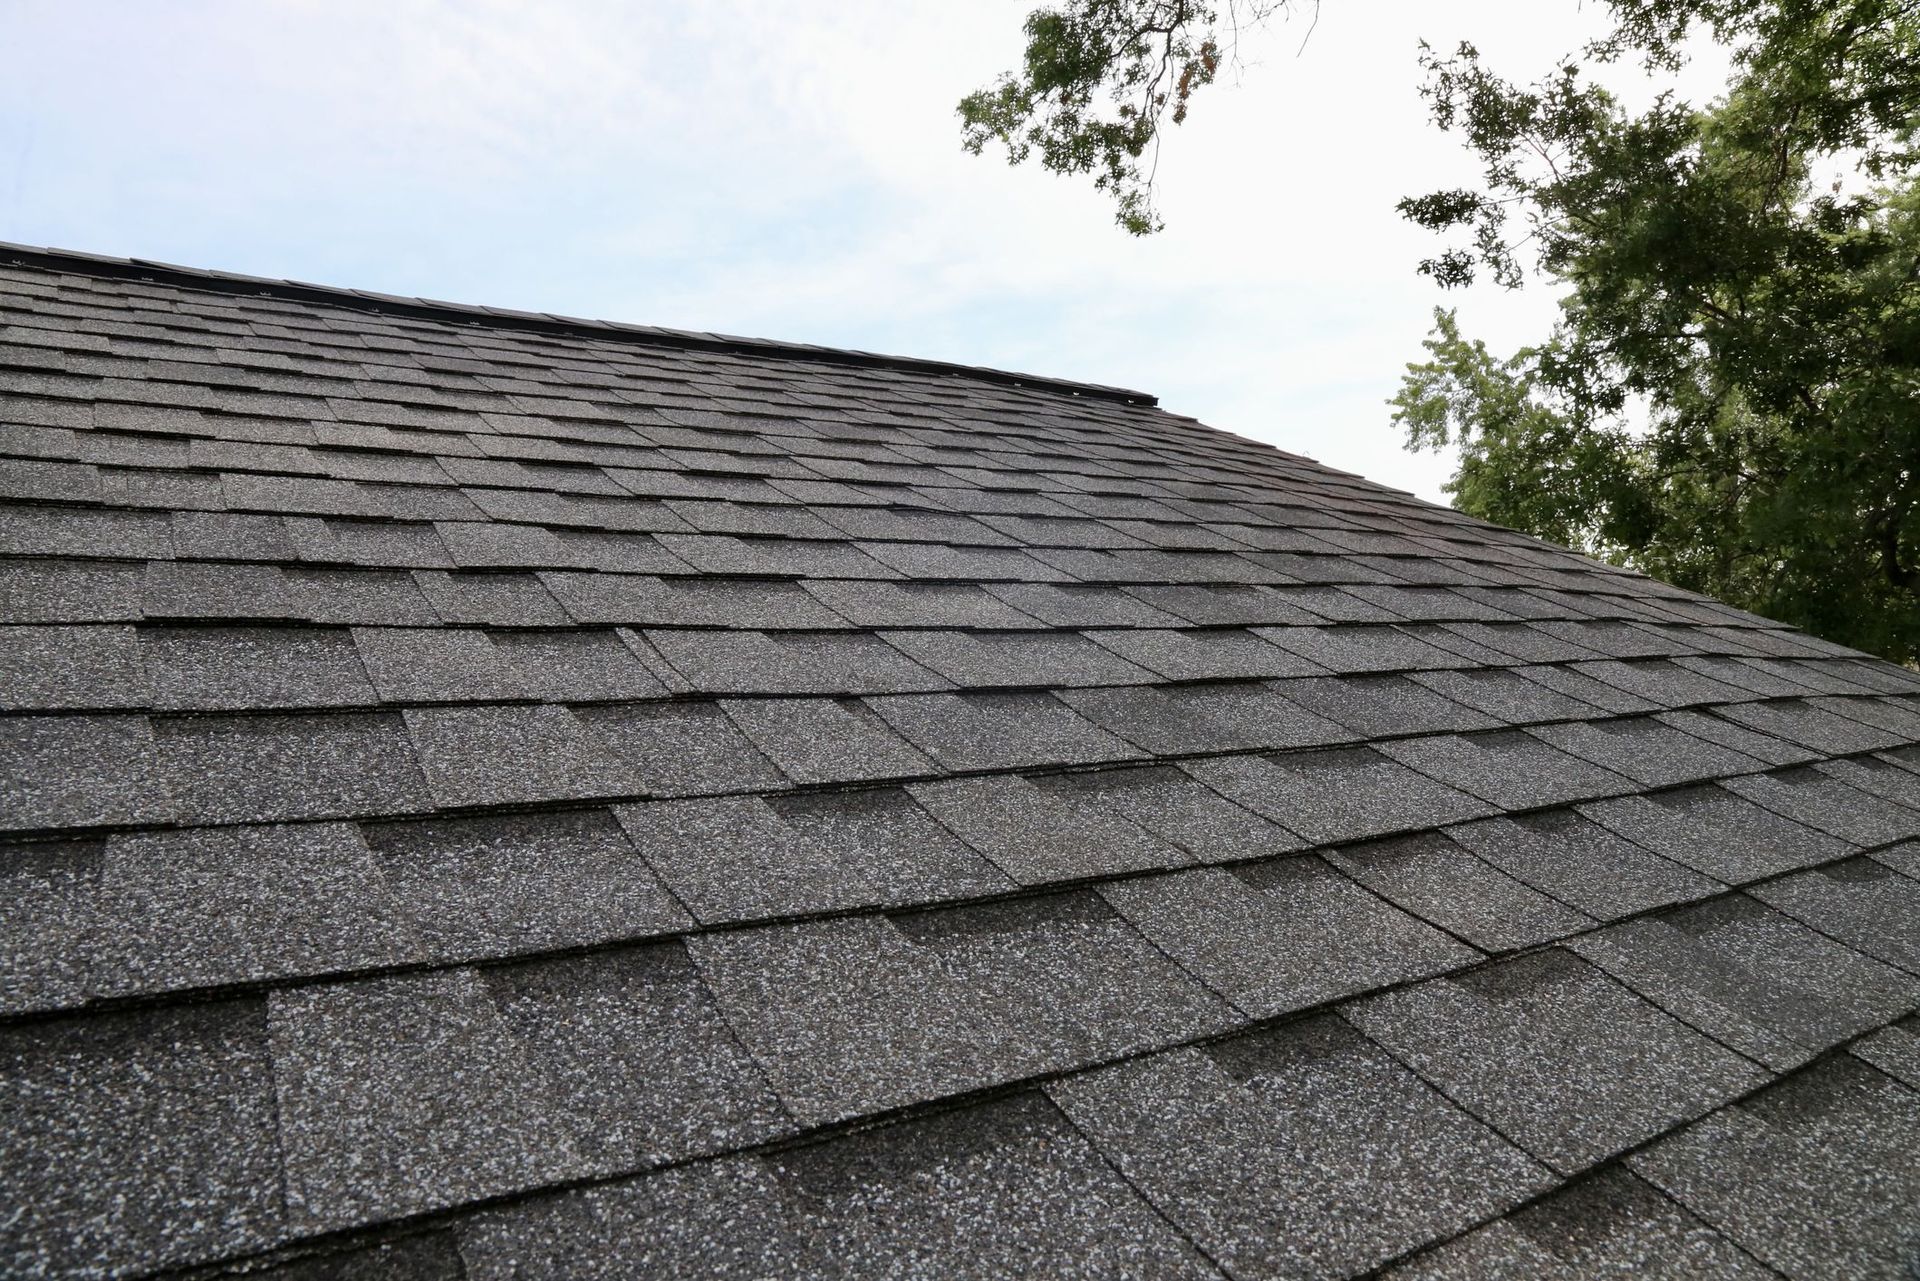 Close-up image showcasing a well-maintained roof with durable shingles, providing protection.